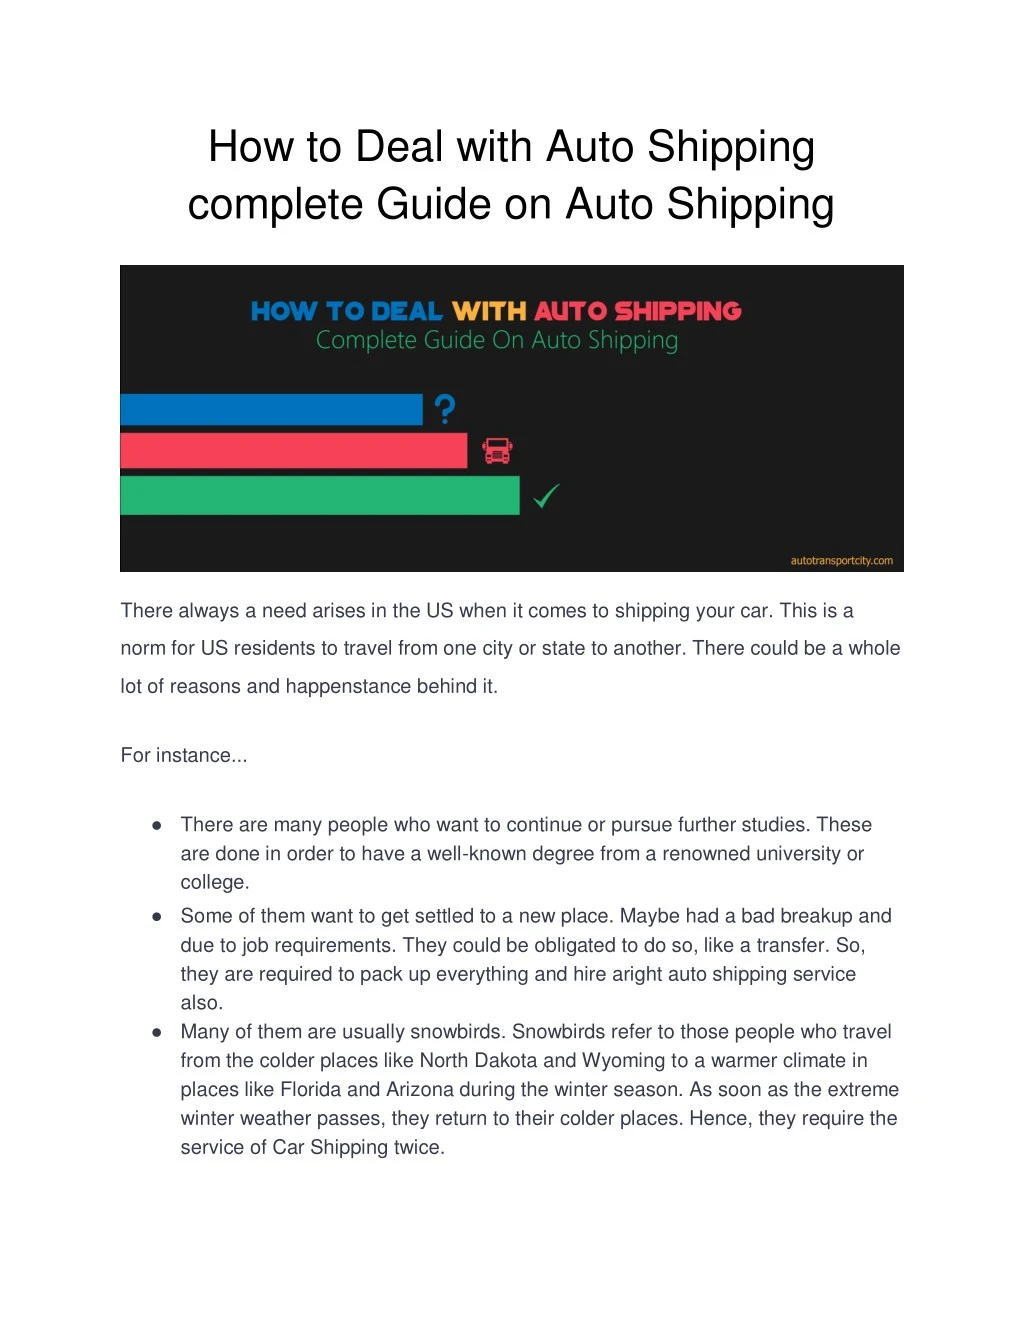 how to deal with auto shipping complete guide